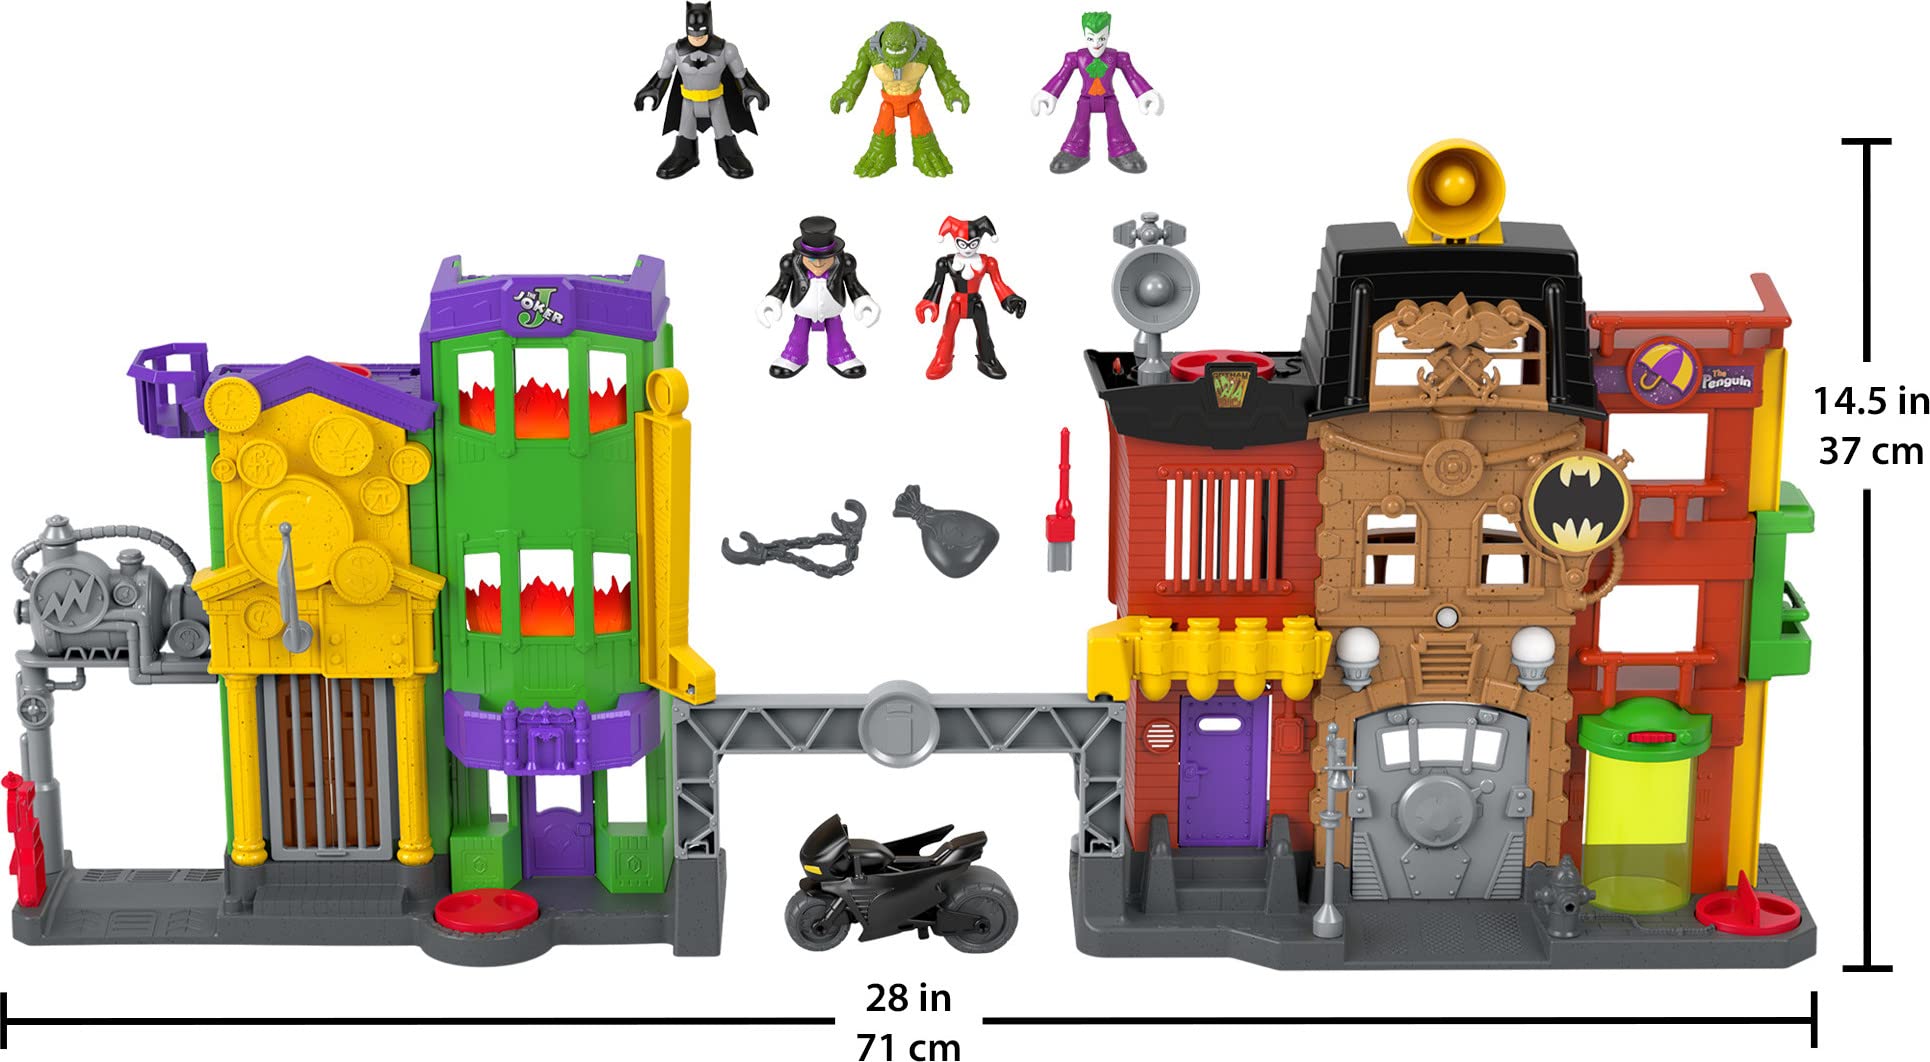 Imaginext DC Super Friends Batman Playset Crime Alley with Character Figures & Accessories for Pretend Play Ages 3+ Years (Amazon Exclusive)